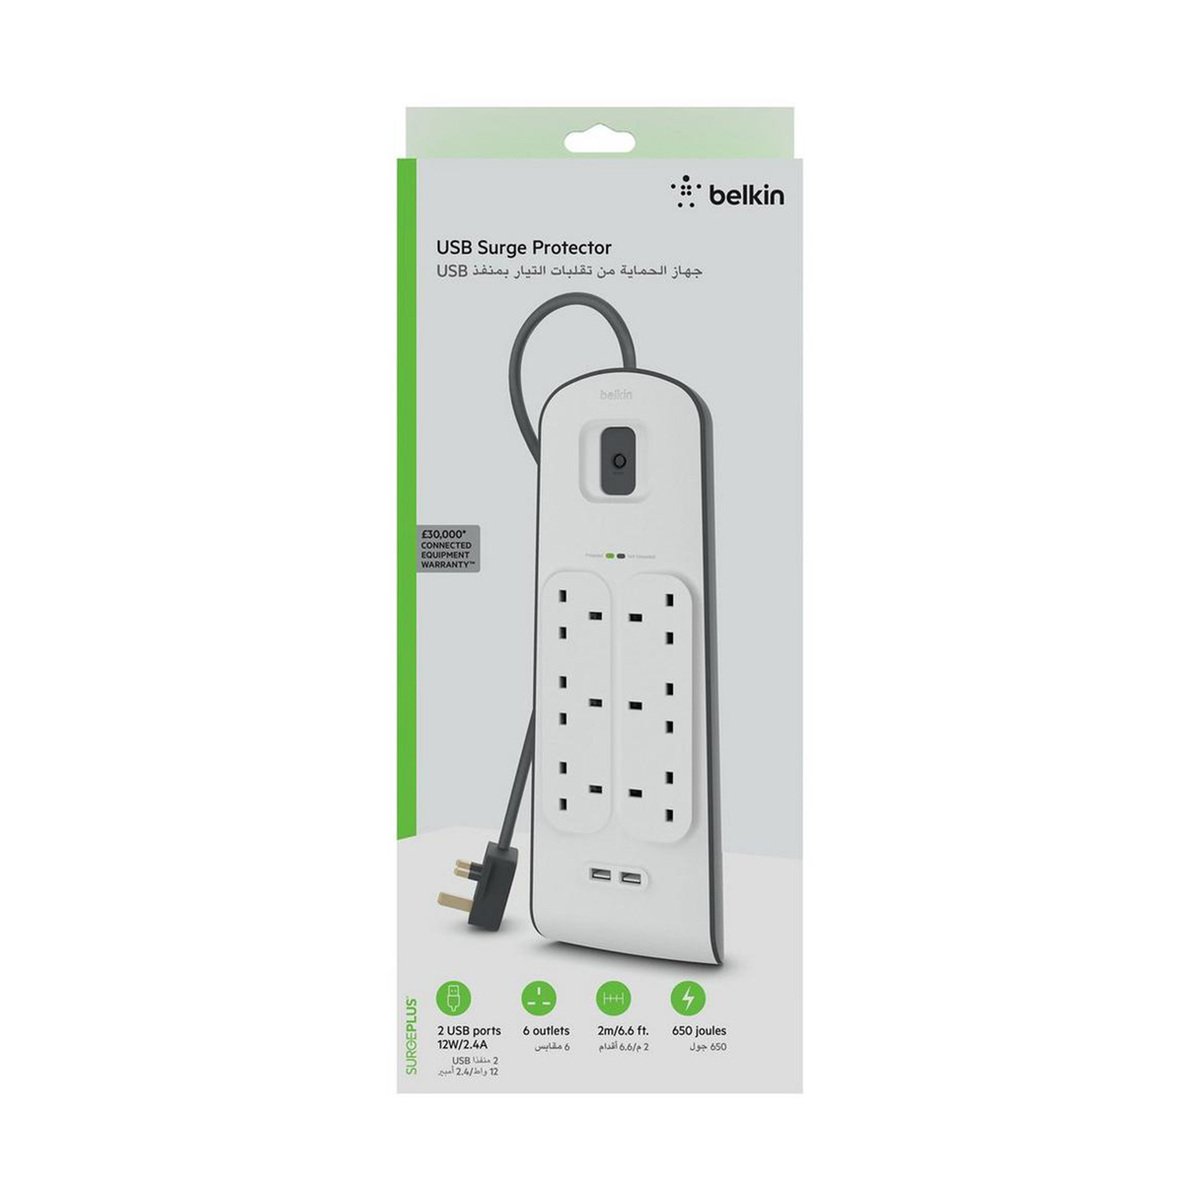 Belkin Surge Protector 6 Out BSV604AR2M